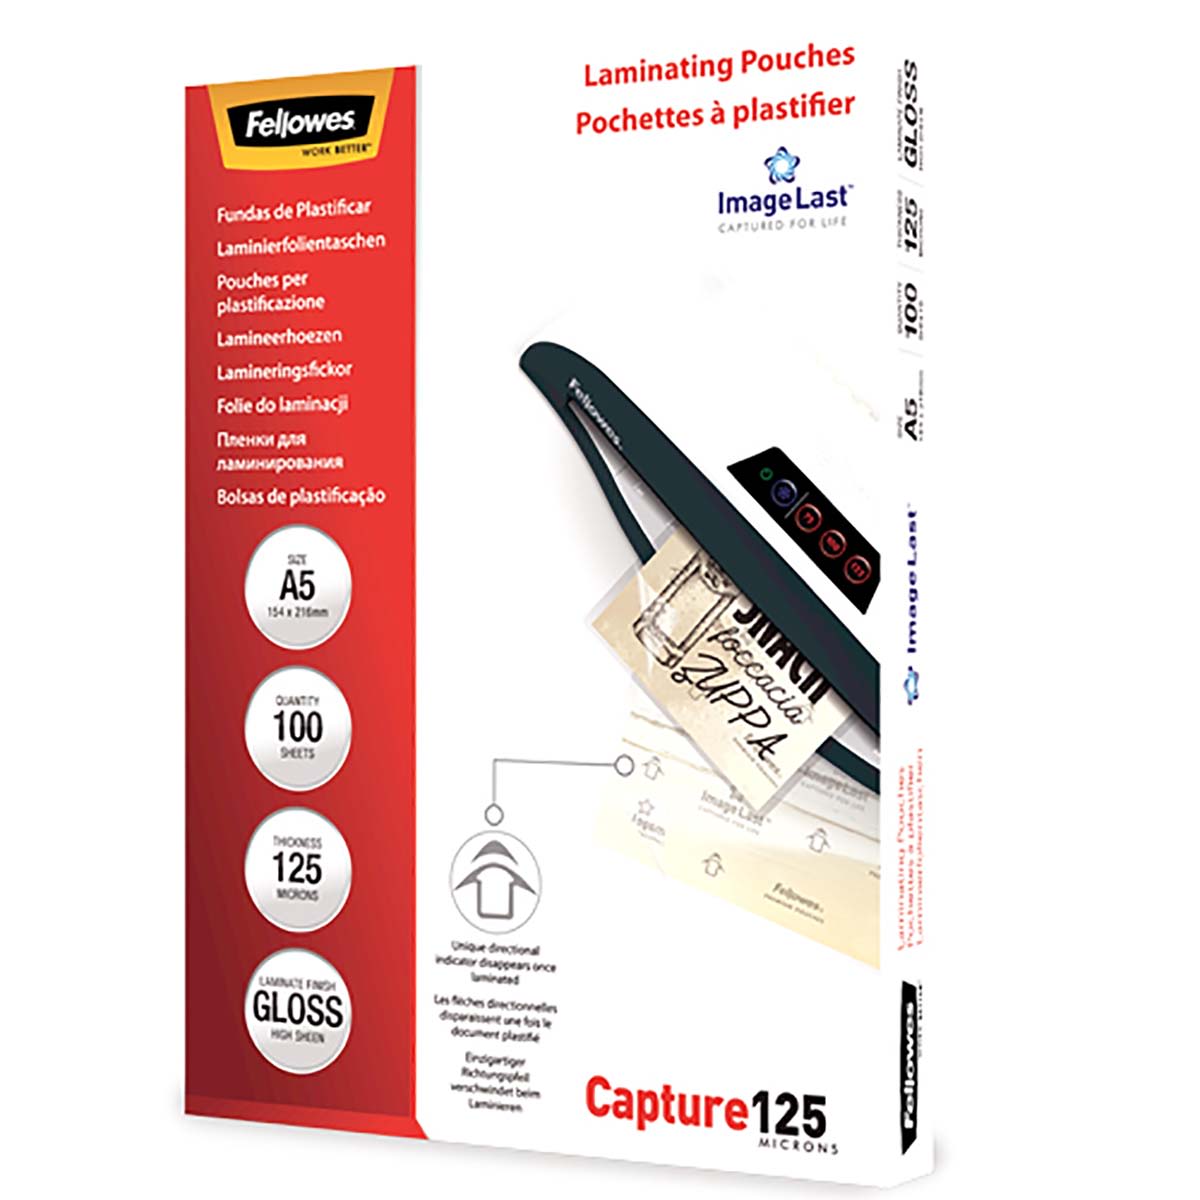 Fellowes A4 Glossy Laminator Pouches 125micron Thickness, 100 Pack Quantity